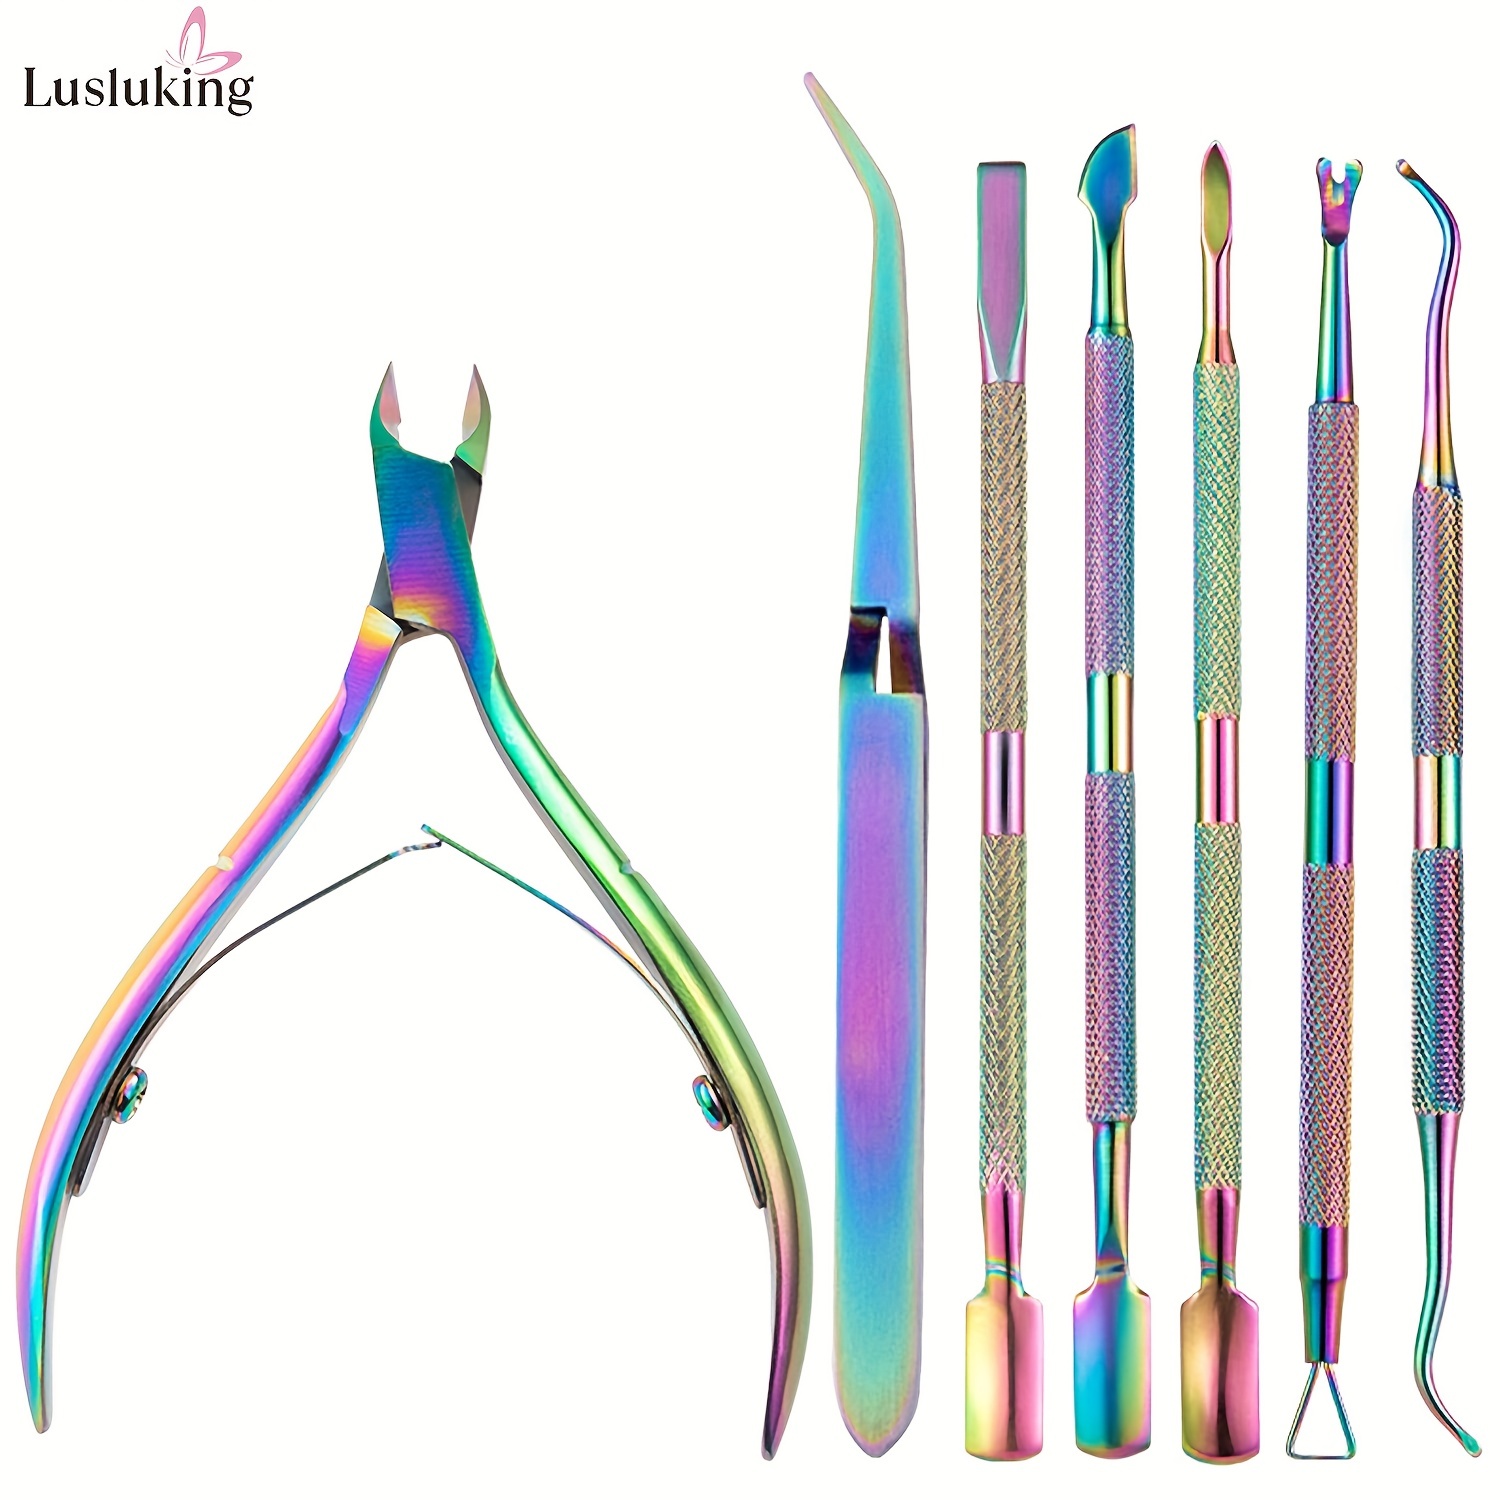 

7 Pcs/set Stainless Steel Nail Cuticle Scissors Set With Dead Skin Pusher, Manicure Pedicure Tools, Nail Files, Uv Polish Gel Remover - Perfect For Professional Nail Care